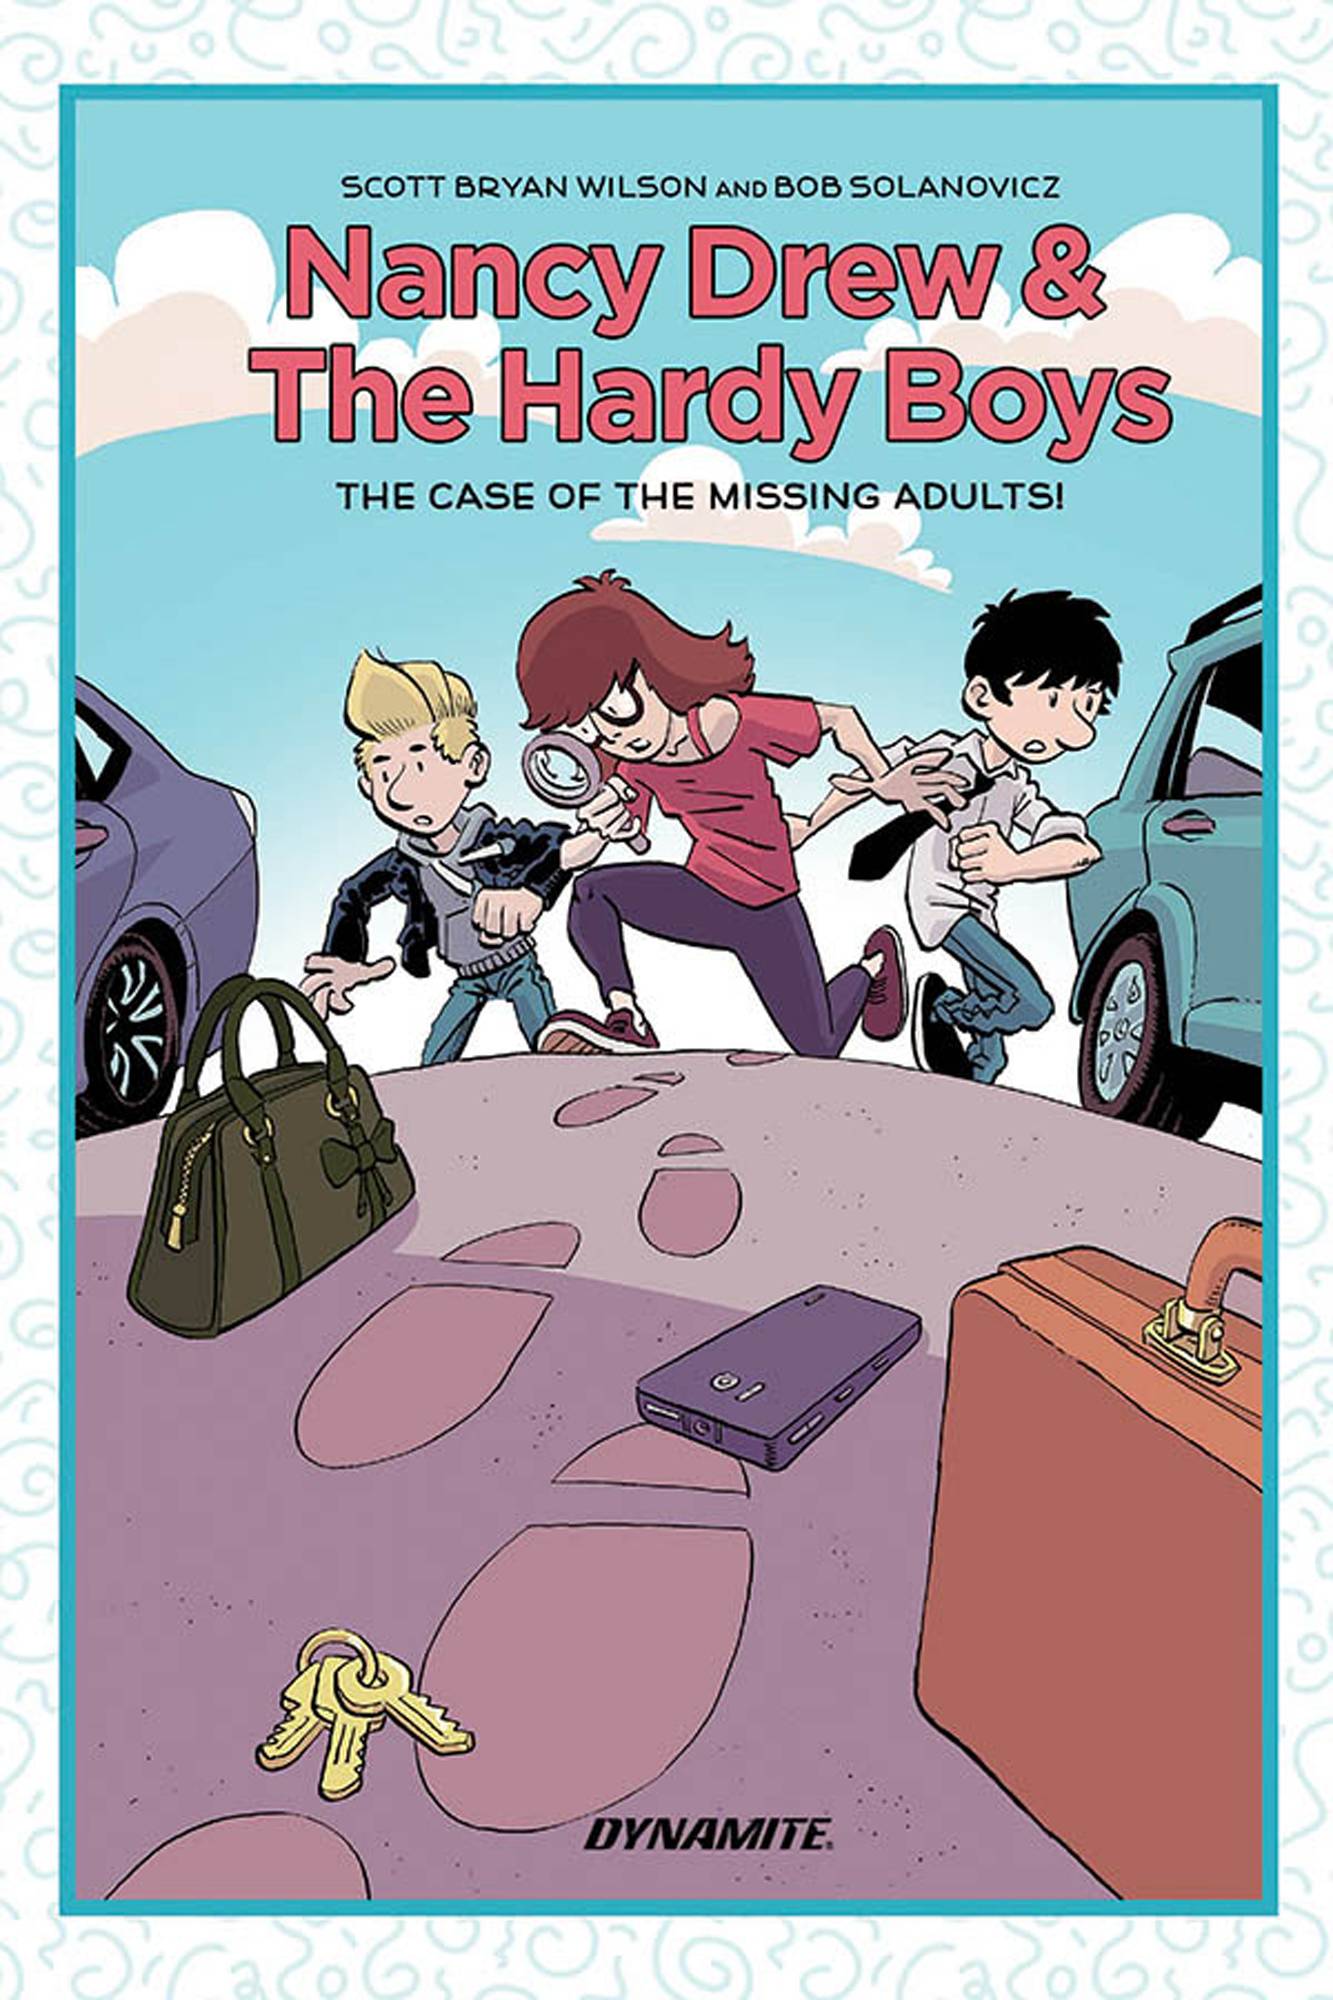 NANCY DREW & THE HARDY BOYS: MYSTERY OF THE MISSING ADULTS